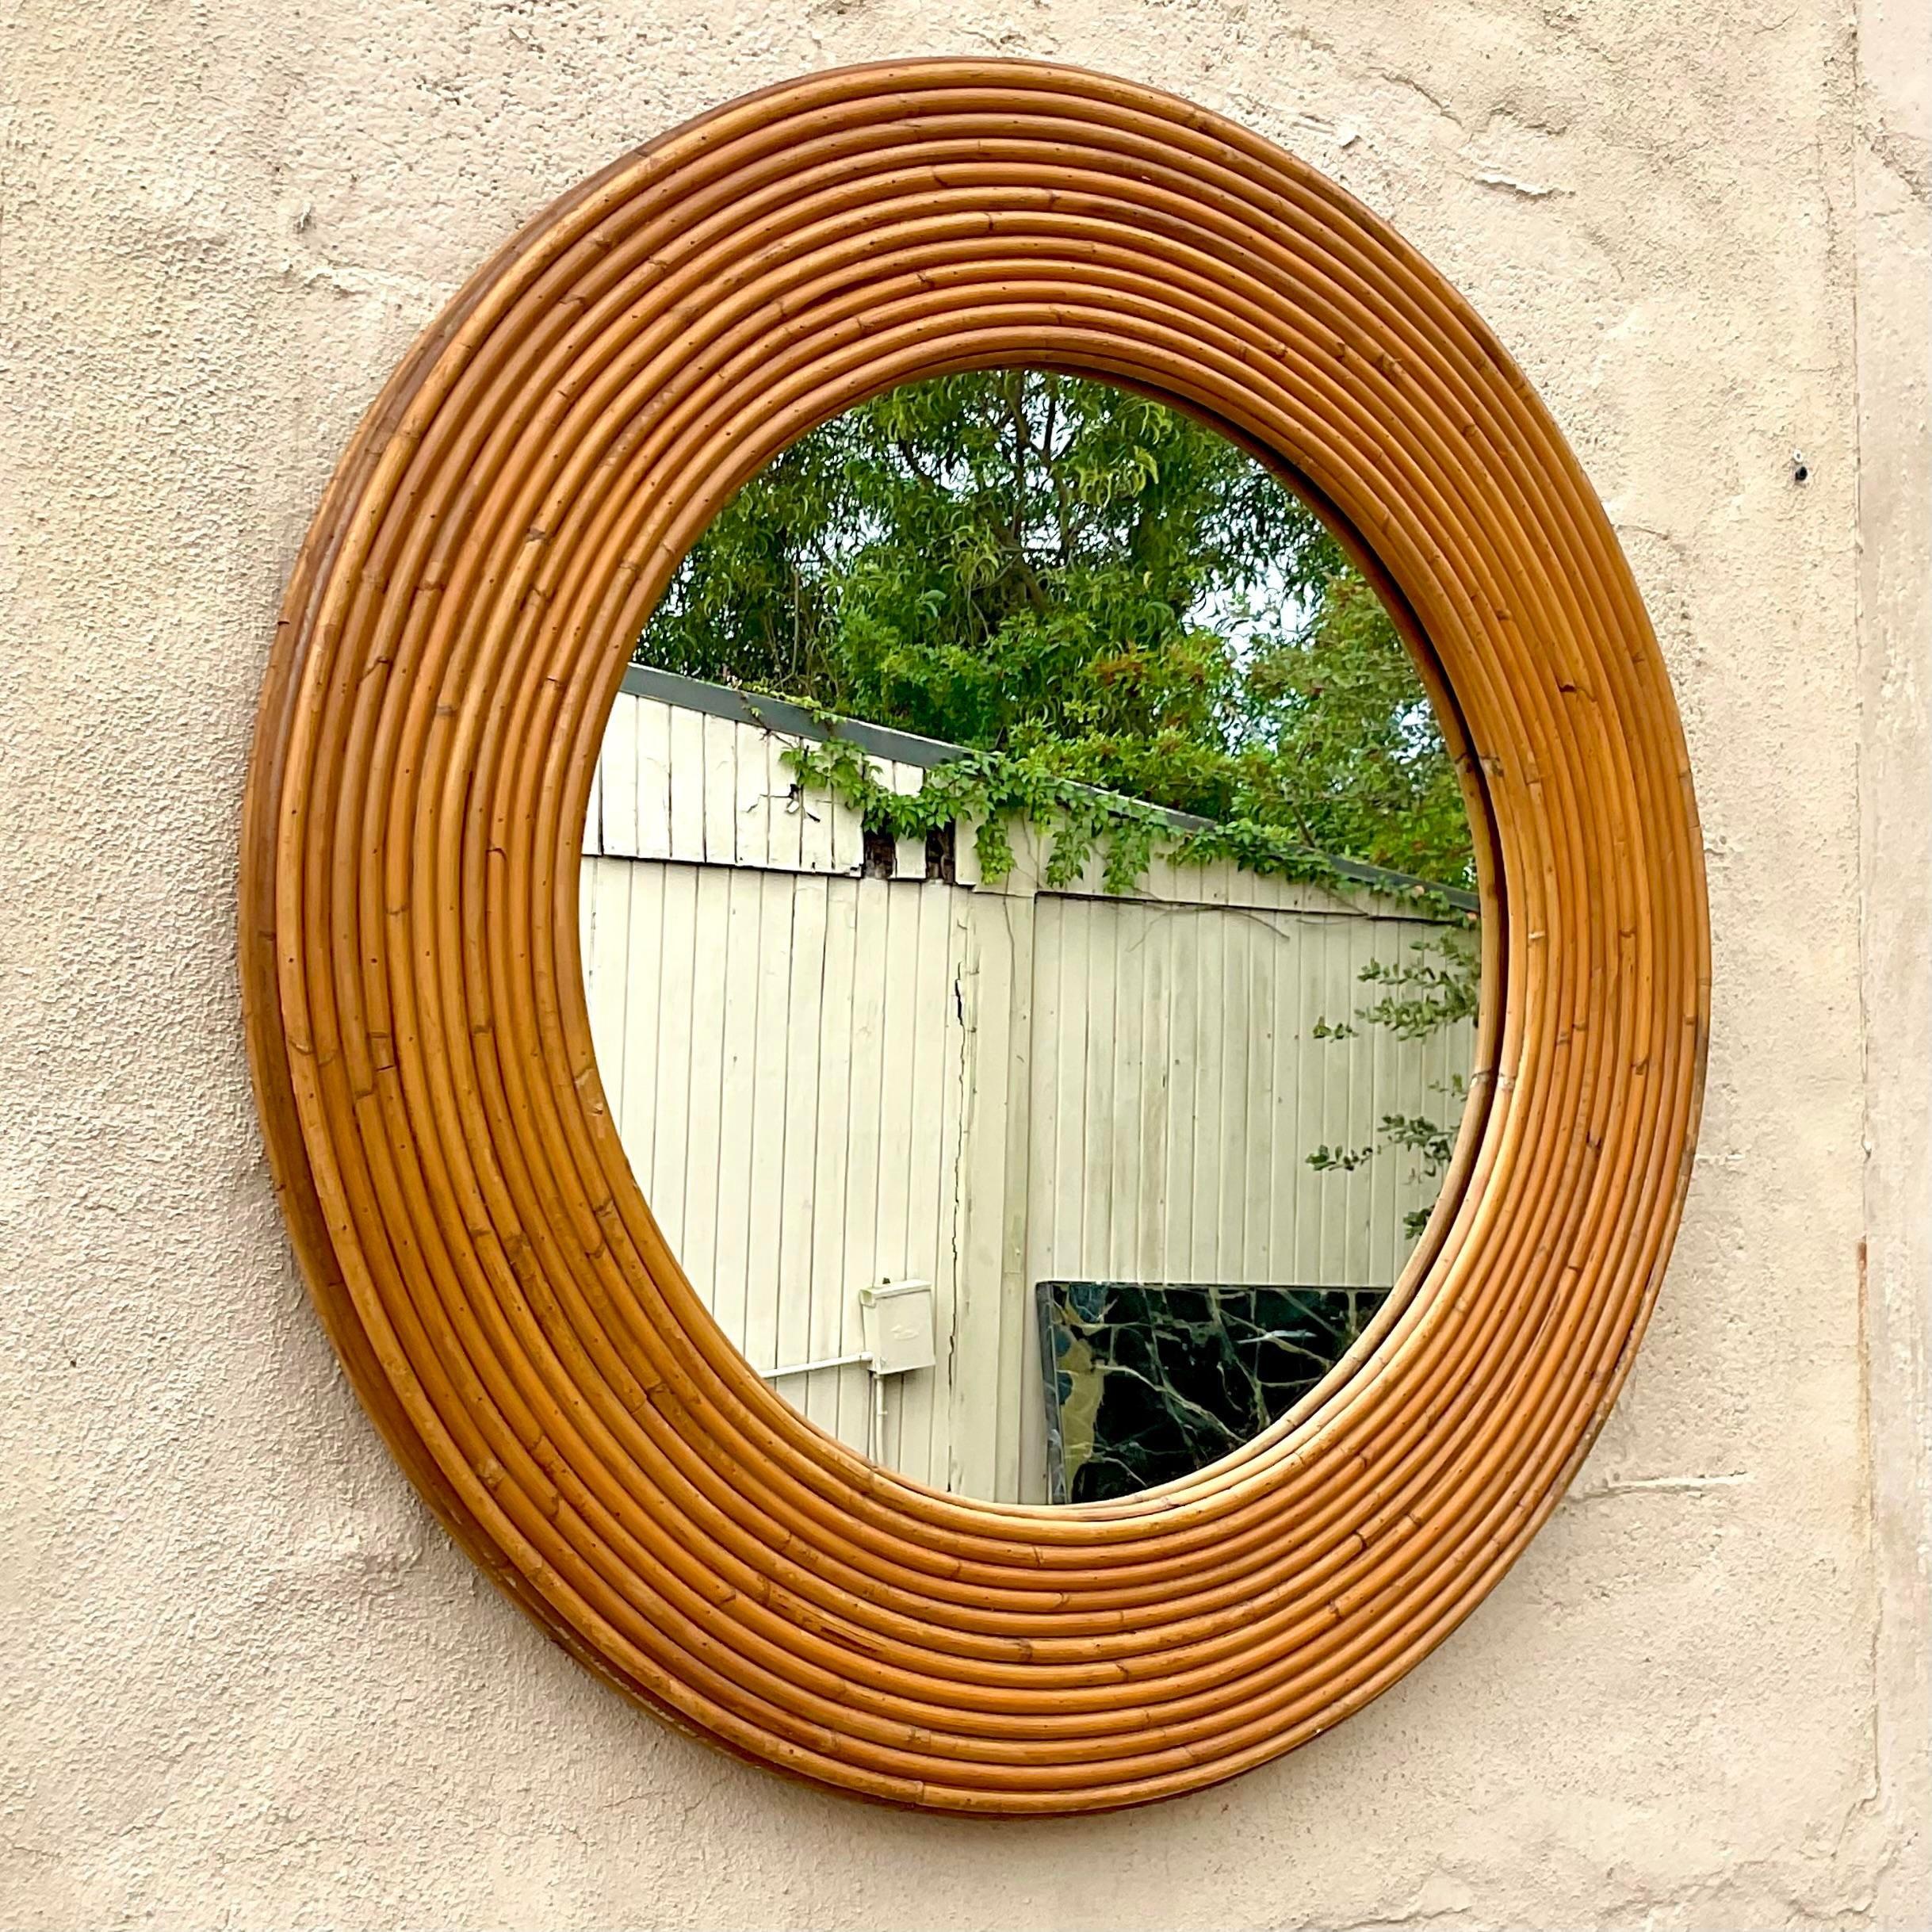 A fantastic vintage Coastal wall mirror. A chic pencil reed construction in a classic red shape. Acquired from a Palm Beach estate. 